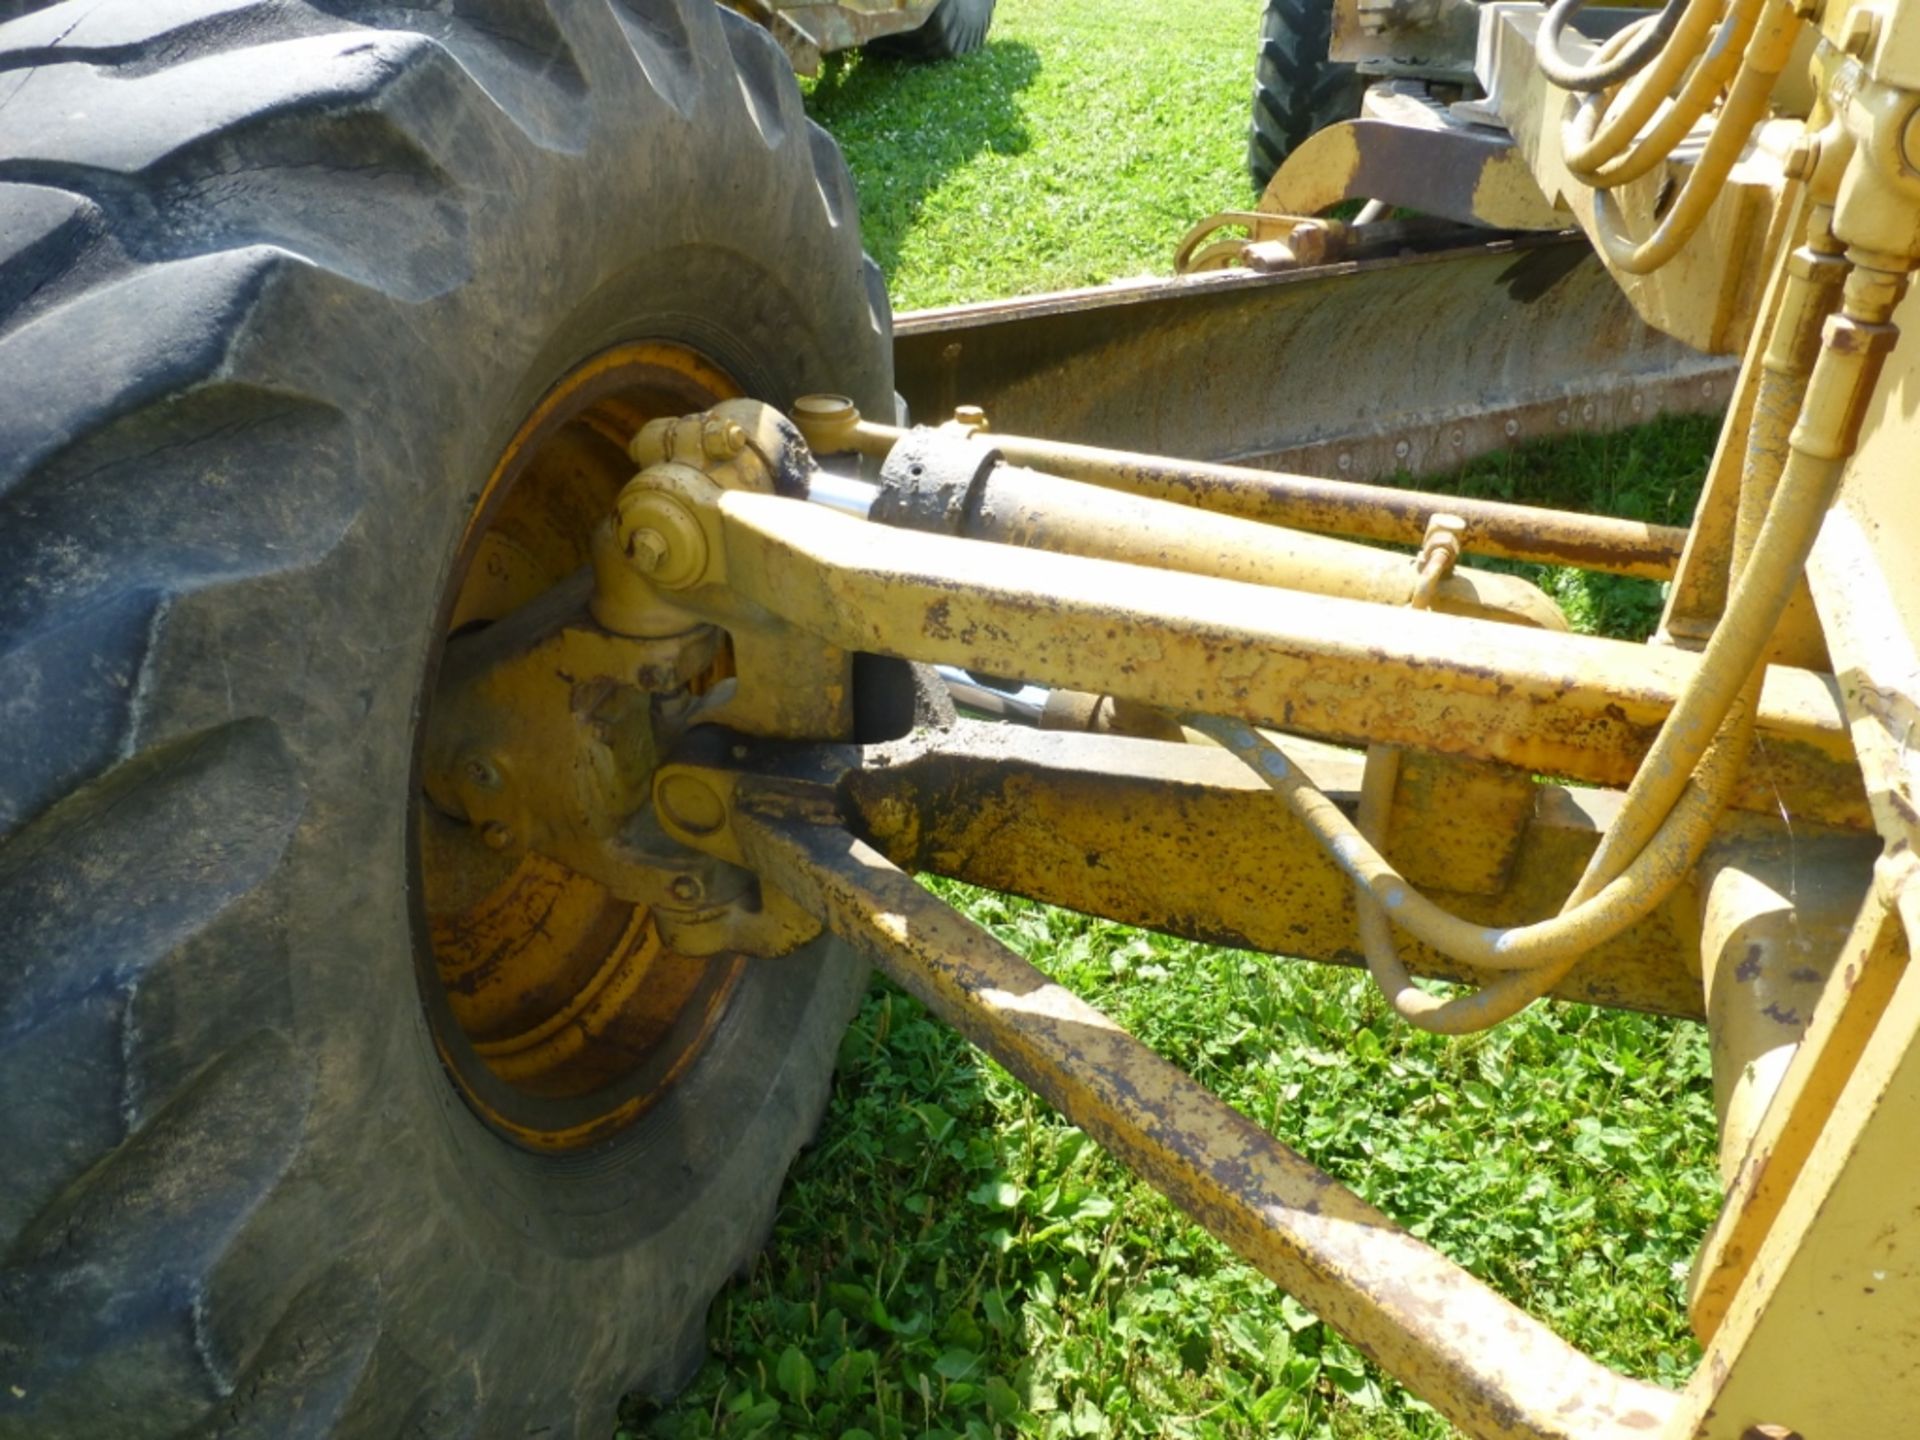 Caterpillar 120G motor grader with 13'10" moldboard se:87v871. Power shift. 7720 unverified hrs. - Image 14 of 27